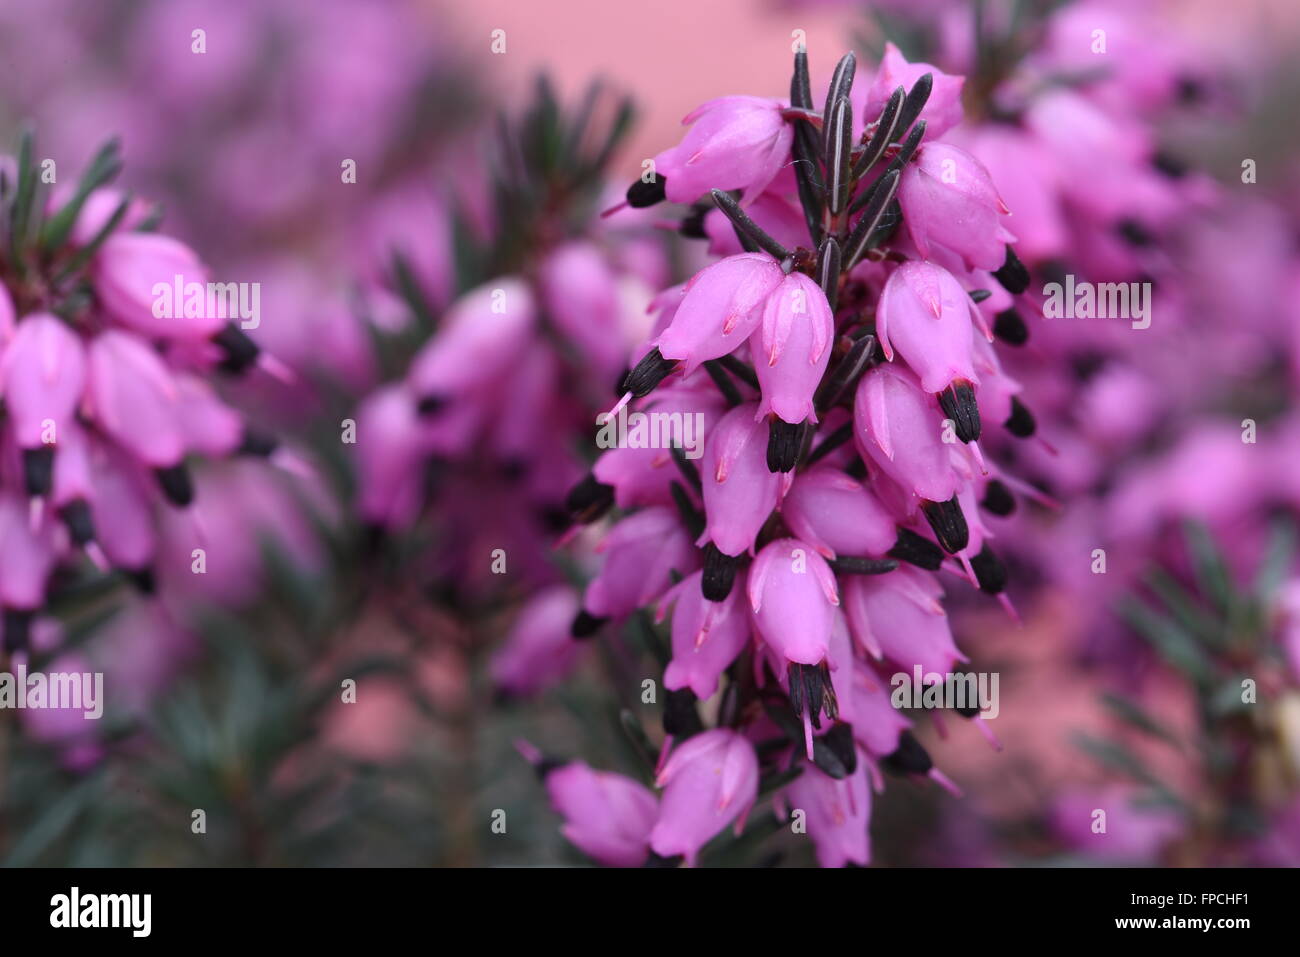 Purple heather flowers in the garden close up Stock Photo